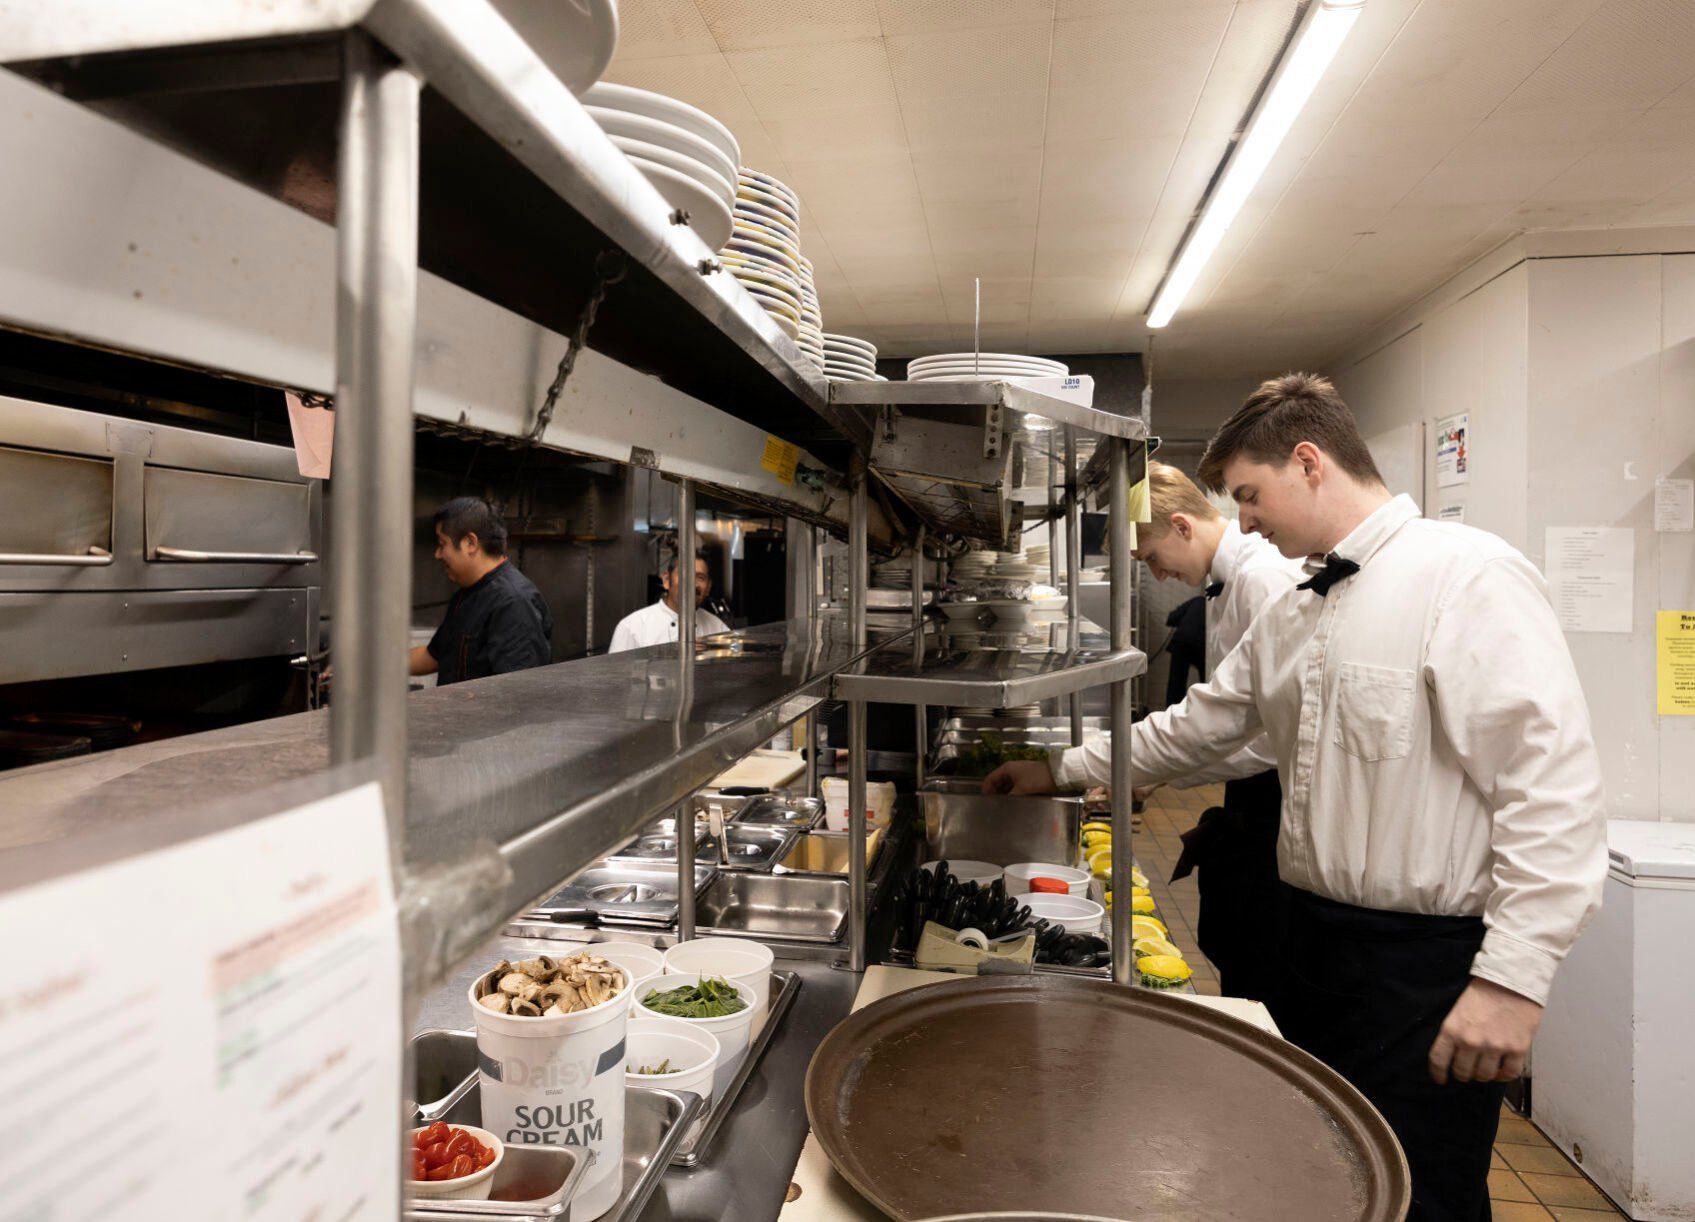 The kitchen at Timmerman’s Supper Club in East Dubuque, Ill., on Saturday, Oct. 8, 2022.    PHOTO CREDIT: Stephen Gassman